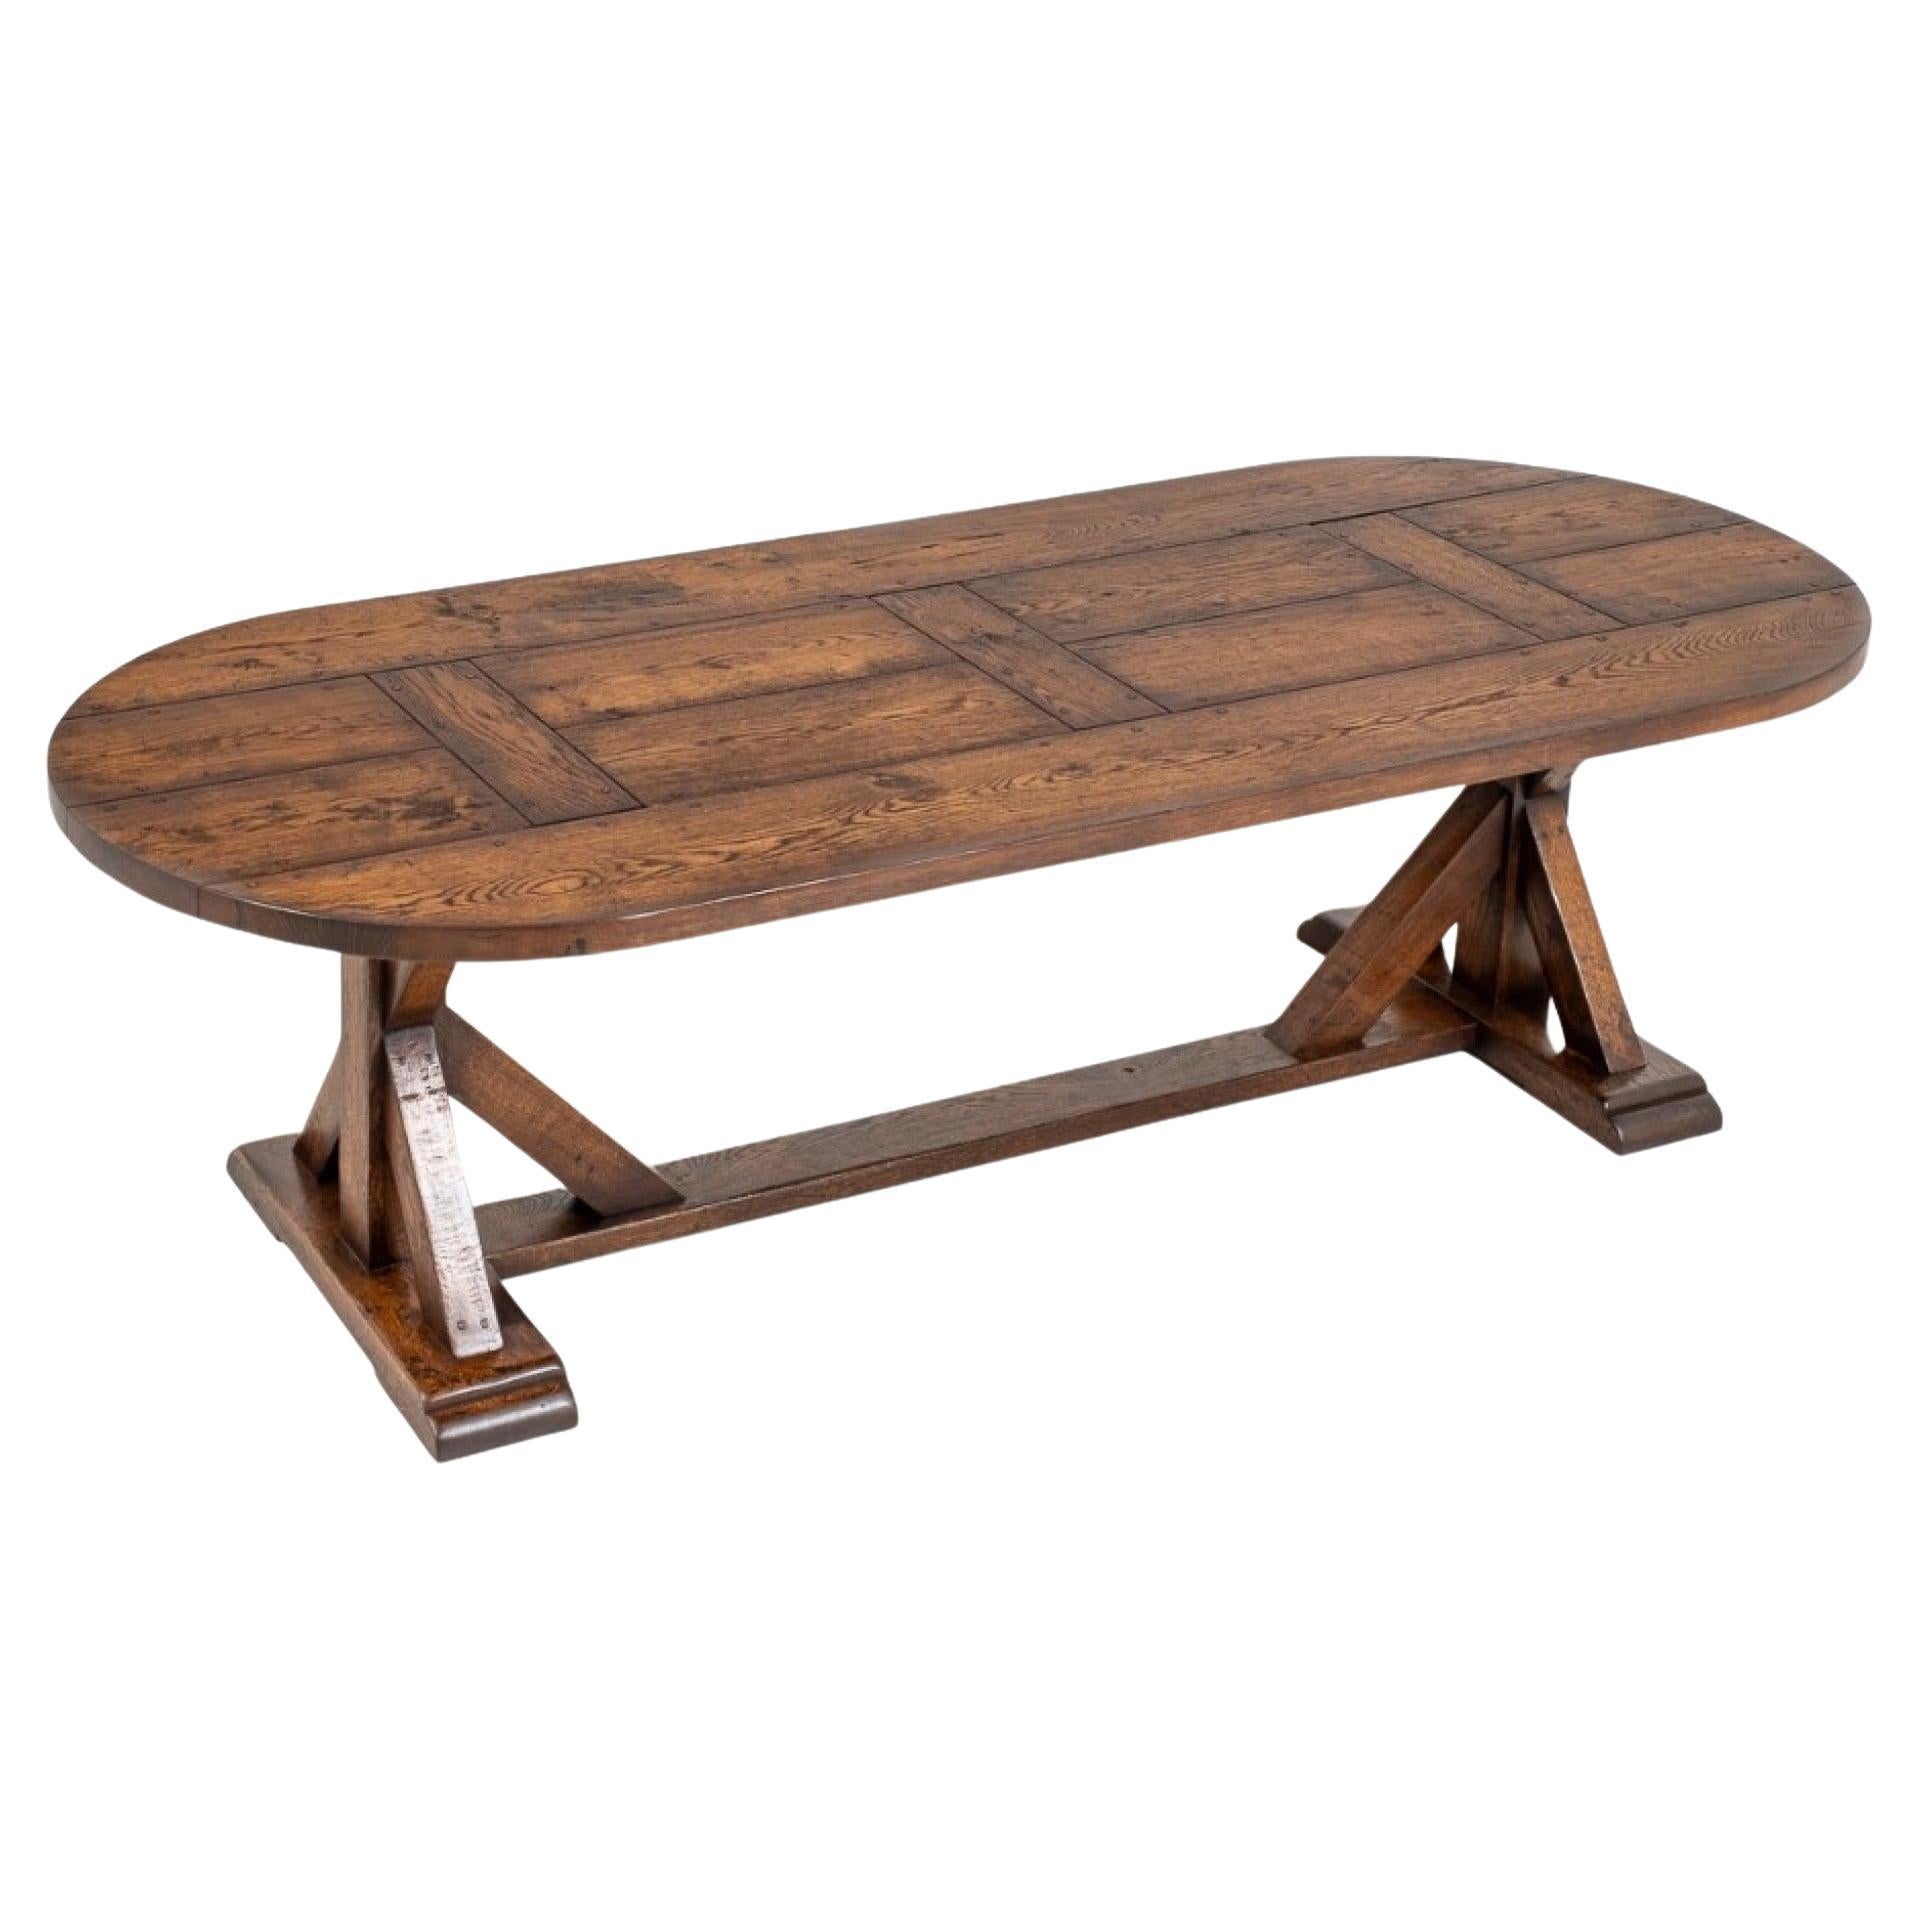 Oak Refectory Table Medeival Banquet Style Farmhouse Kitchen For Sale